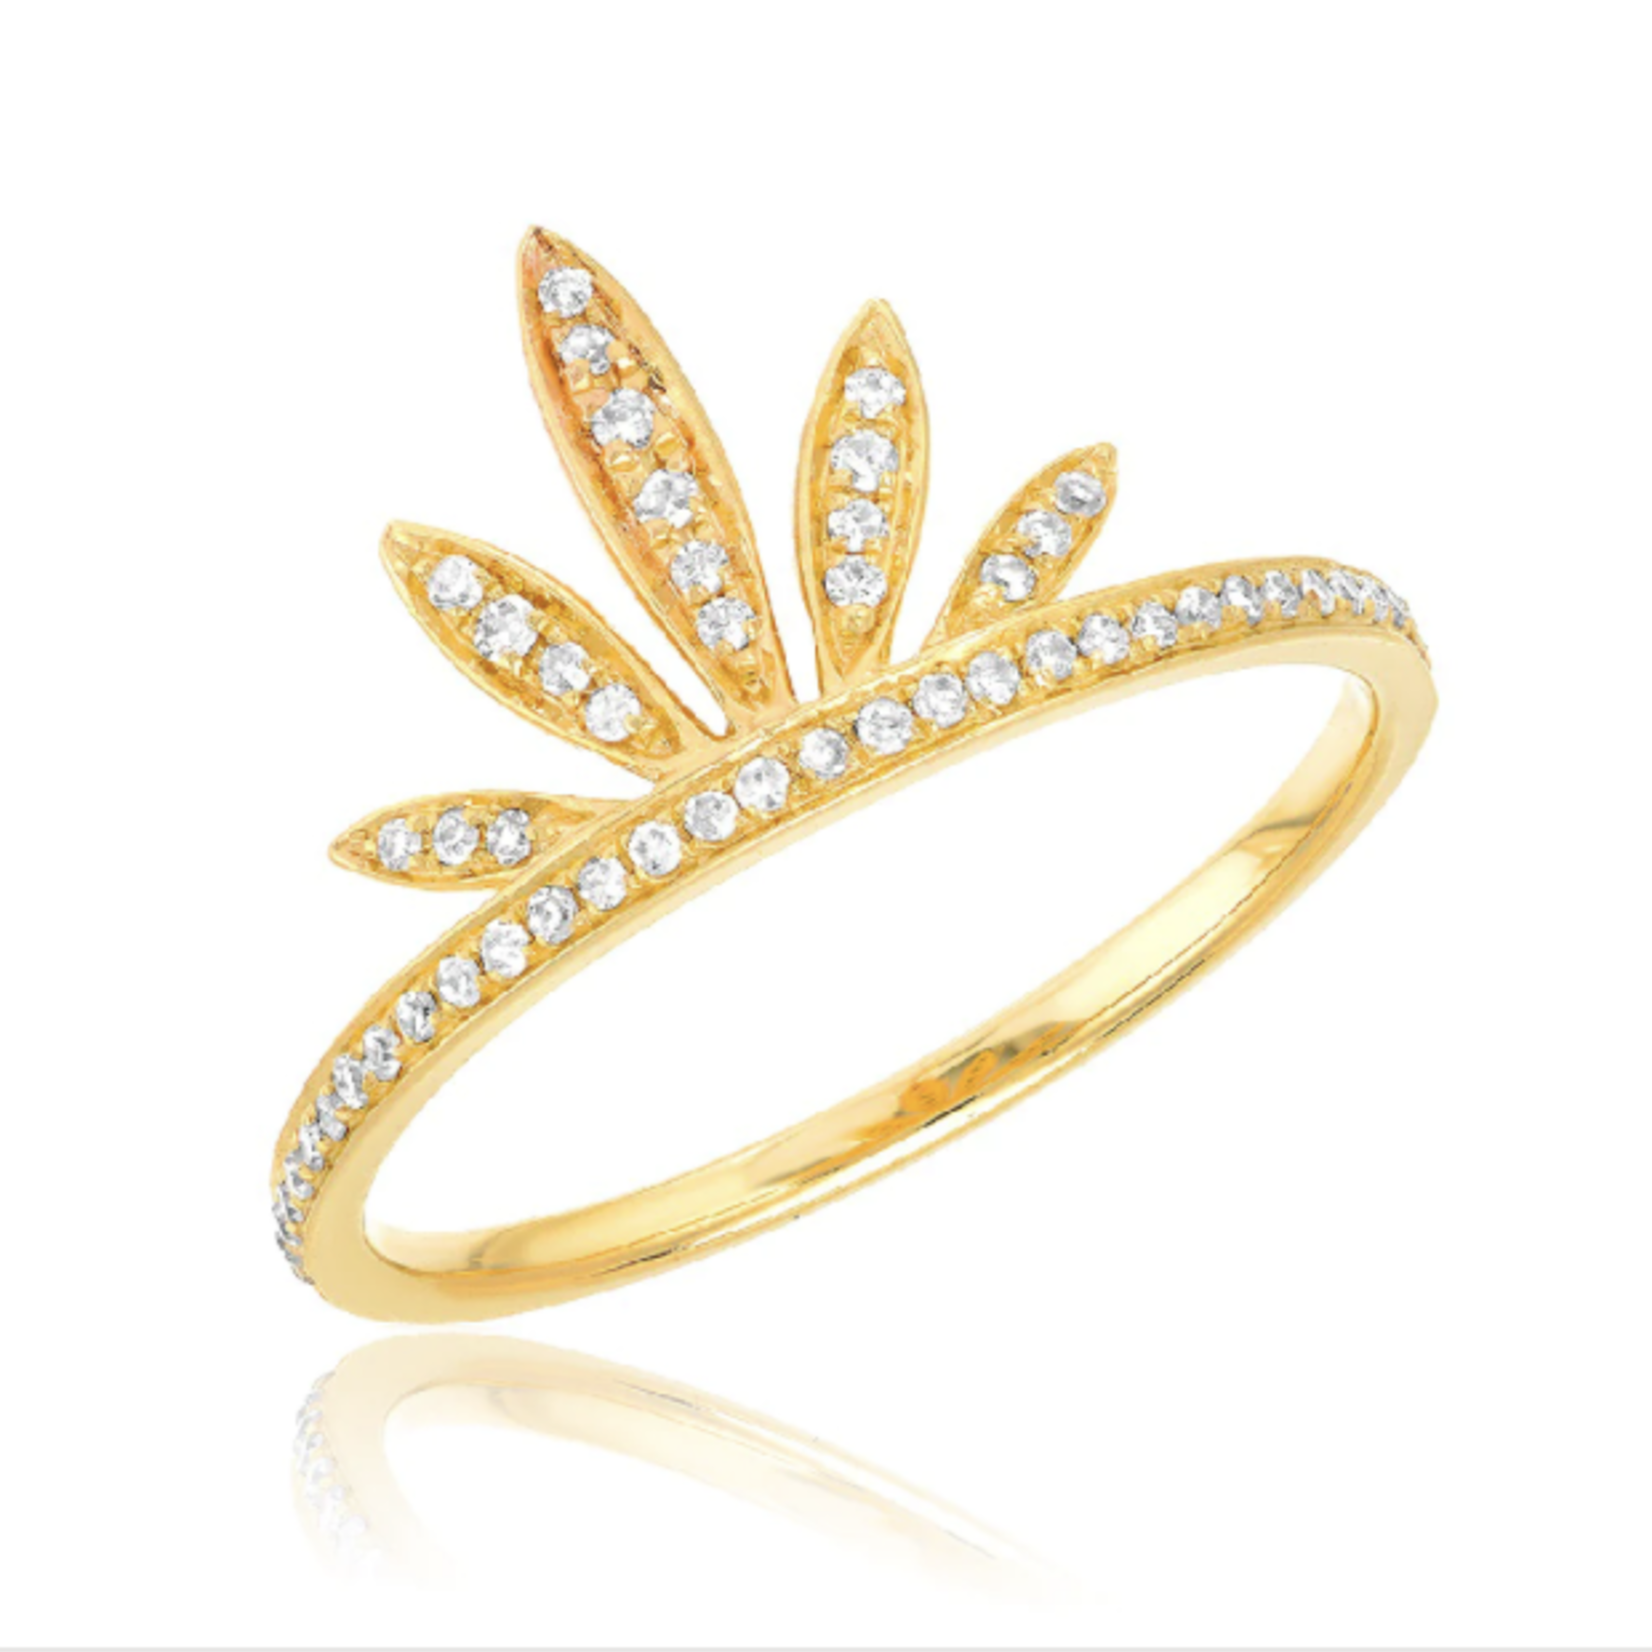 LIVEN CO 14KY Diamond Willow Sunrise Ring- Size 6 1/2